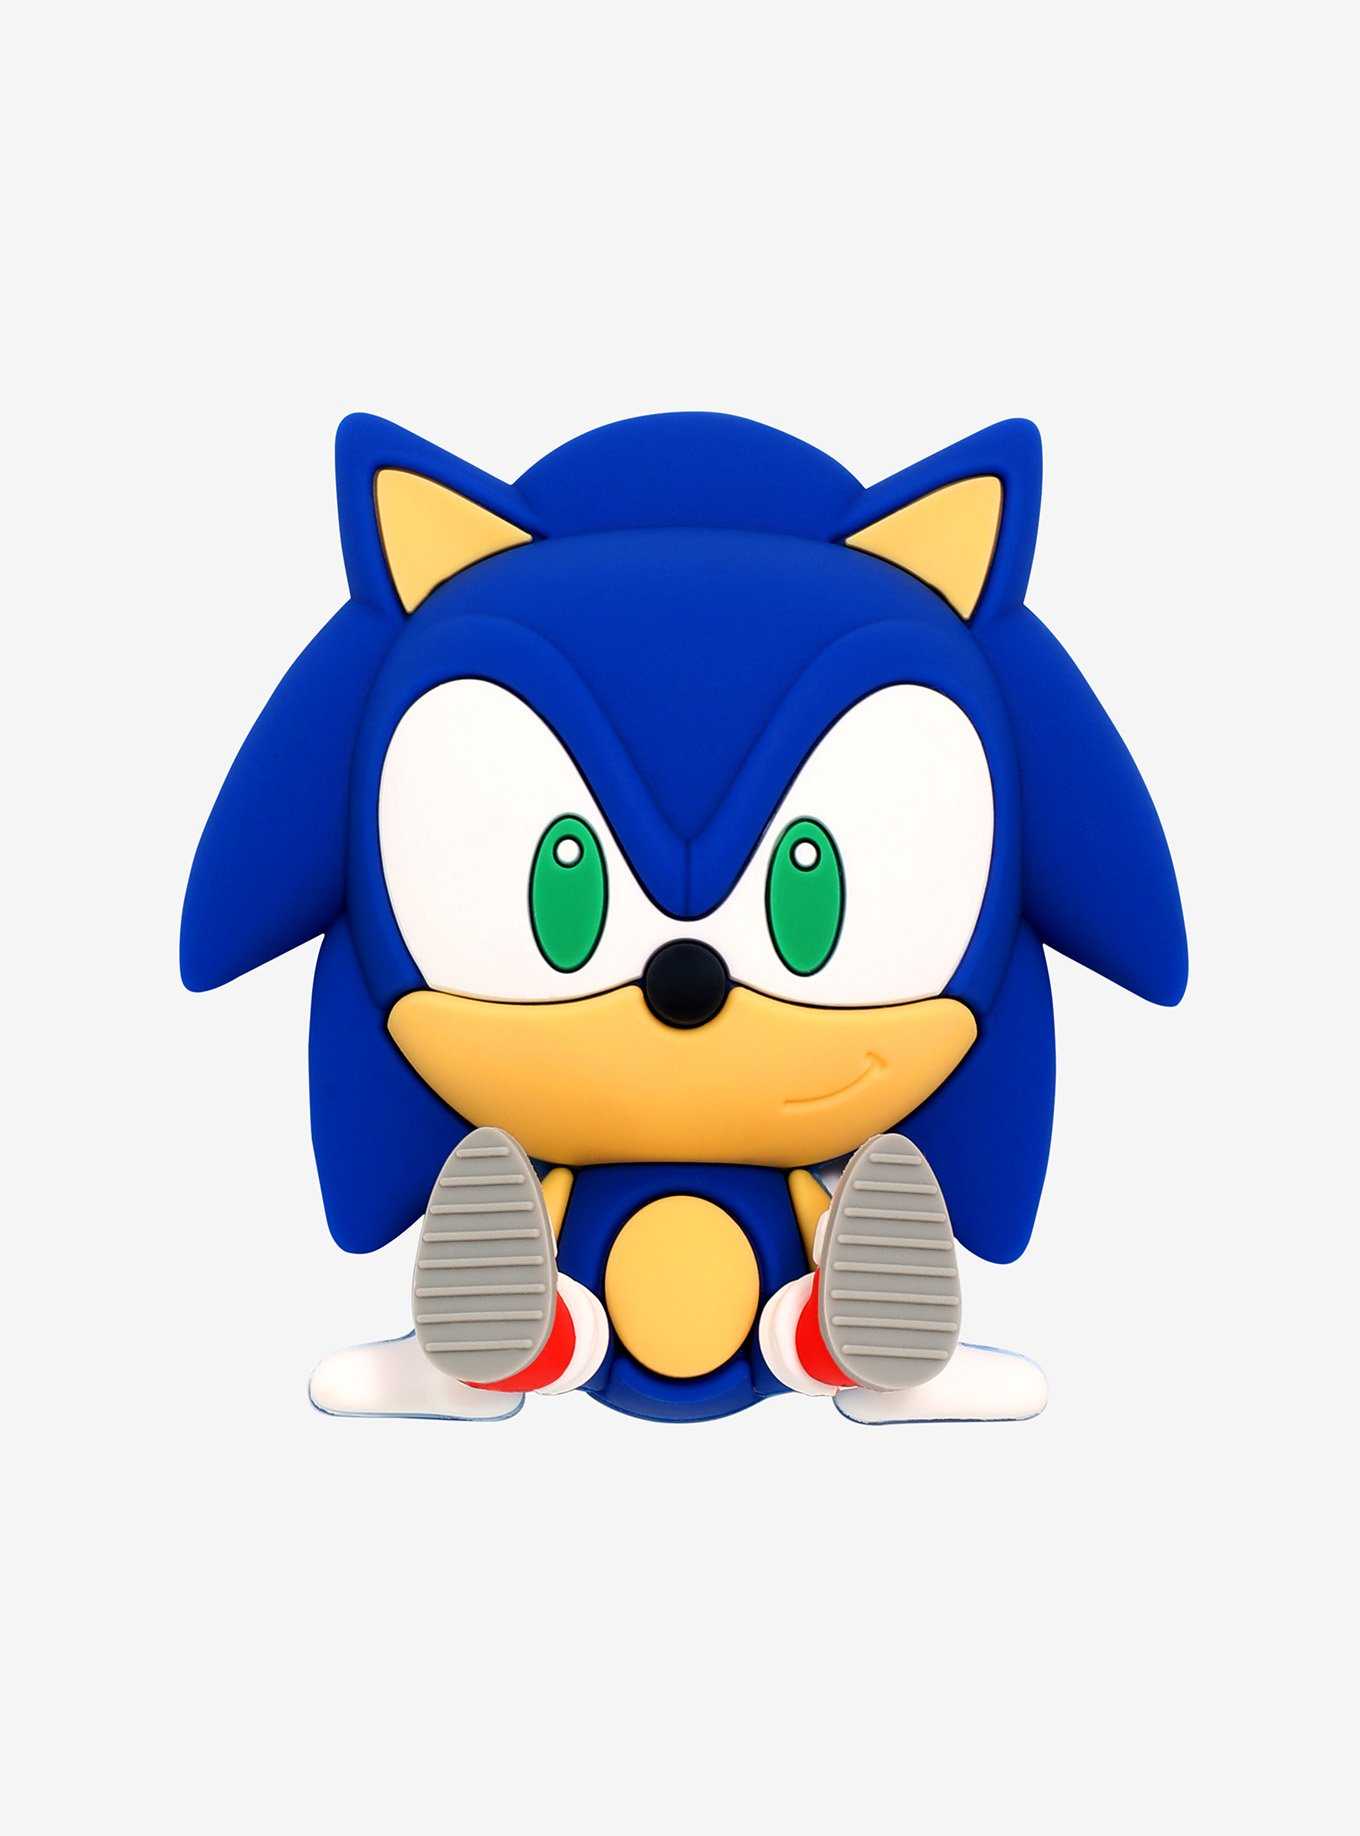 Sonic the Hedgehog Figural Sonic Magnet - BoxLunch Exclusive, , hi-res